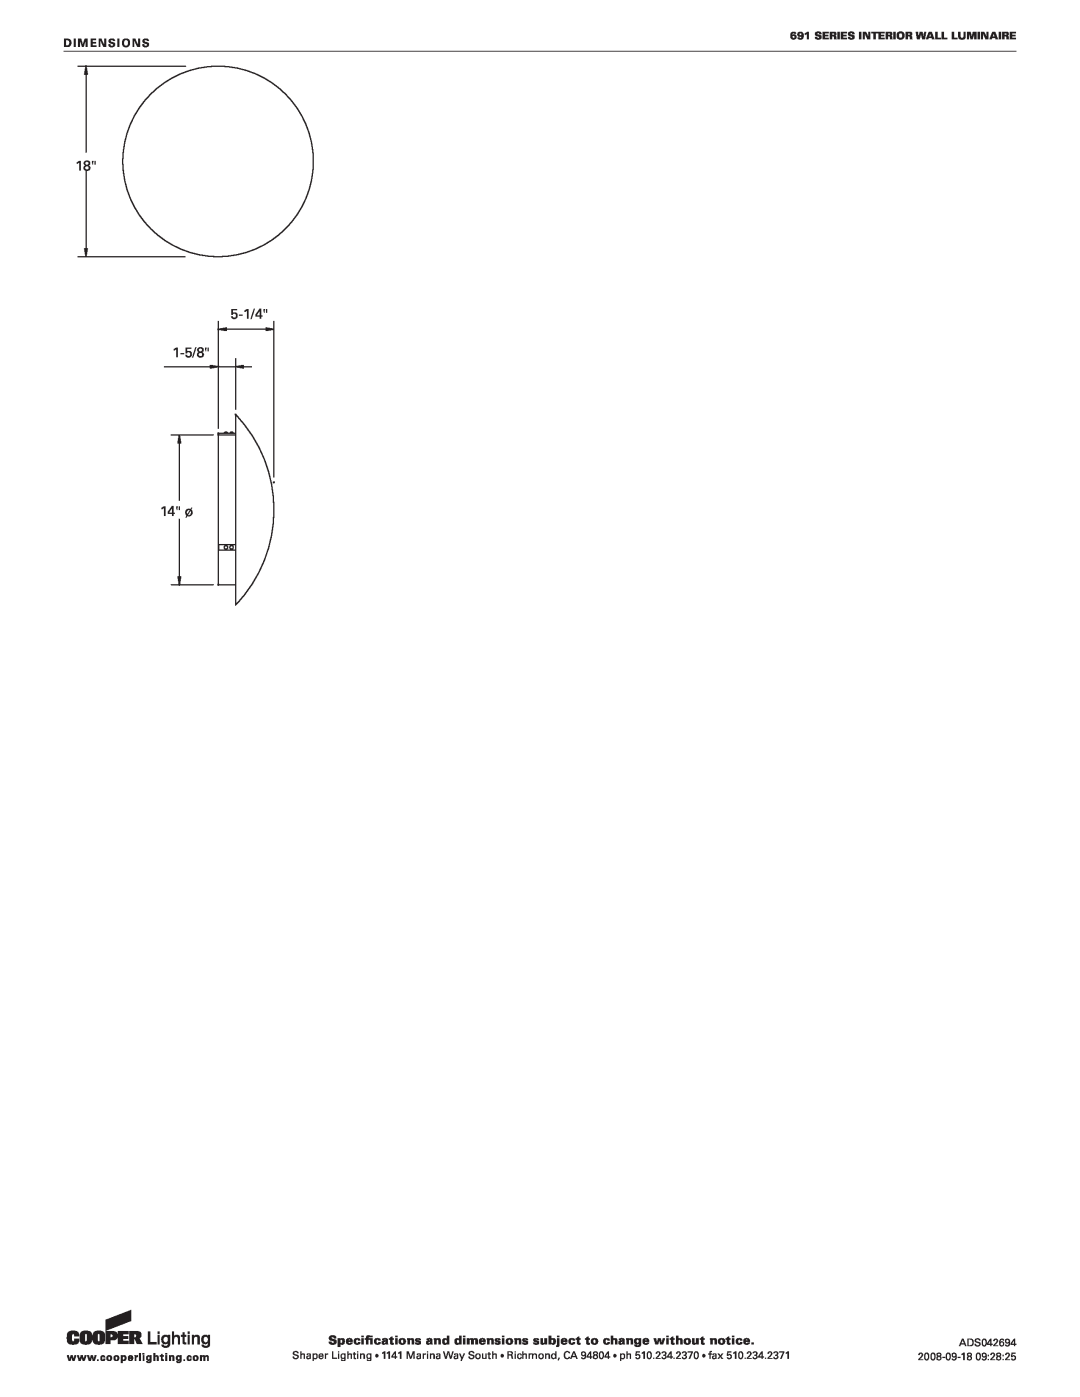 Cooper Lighting 691 specifications 5-1/4 1-5/8 14 ø, Dimensions, Series Interior Wall Luminaire 